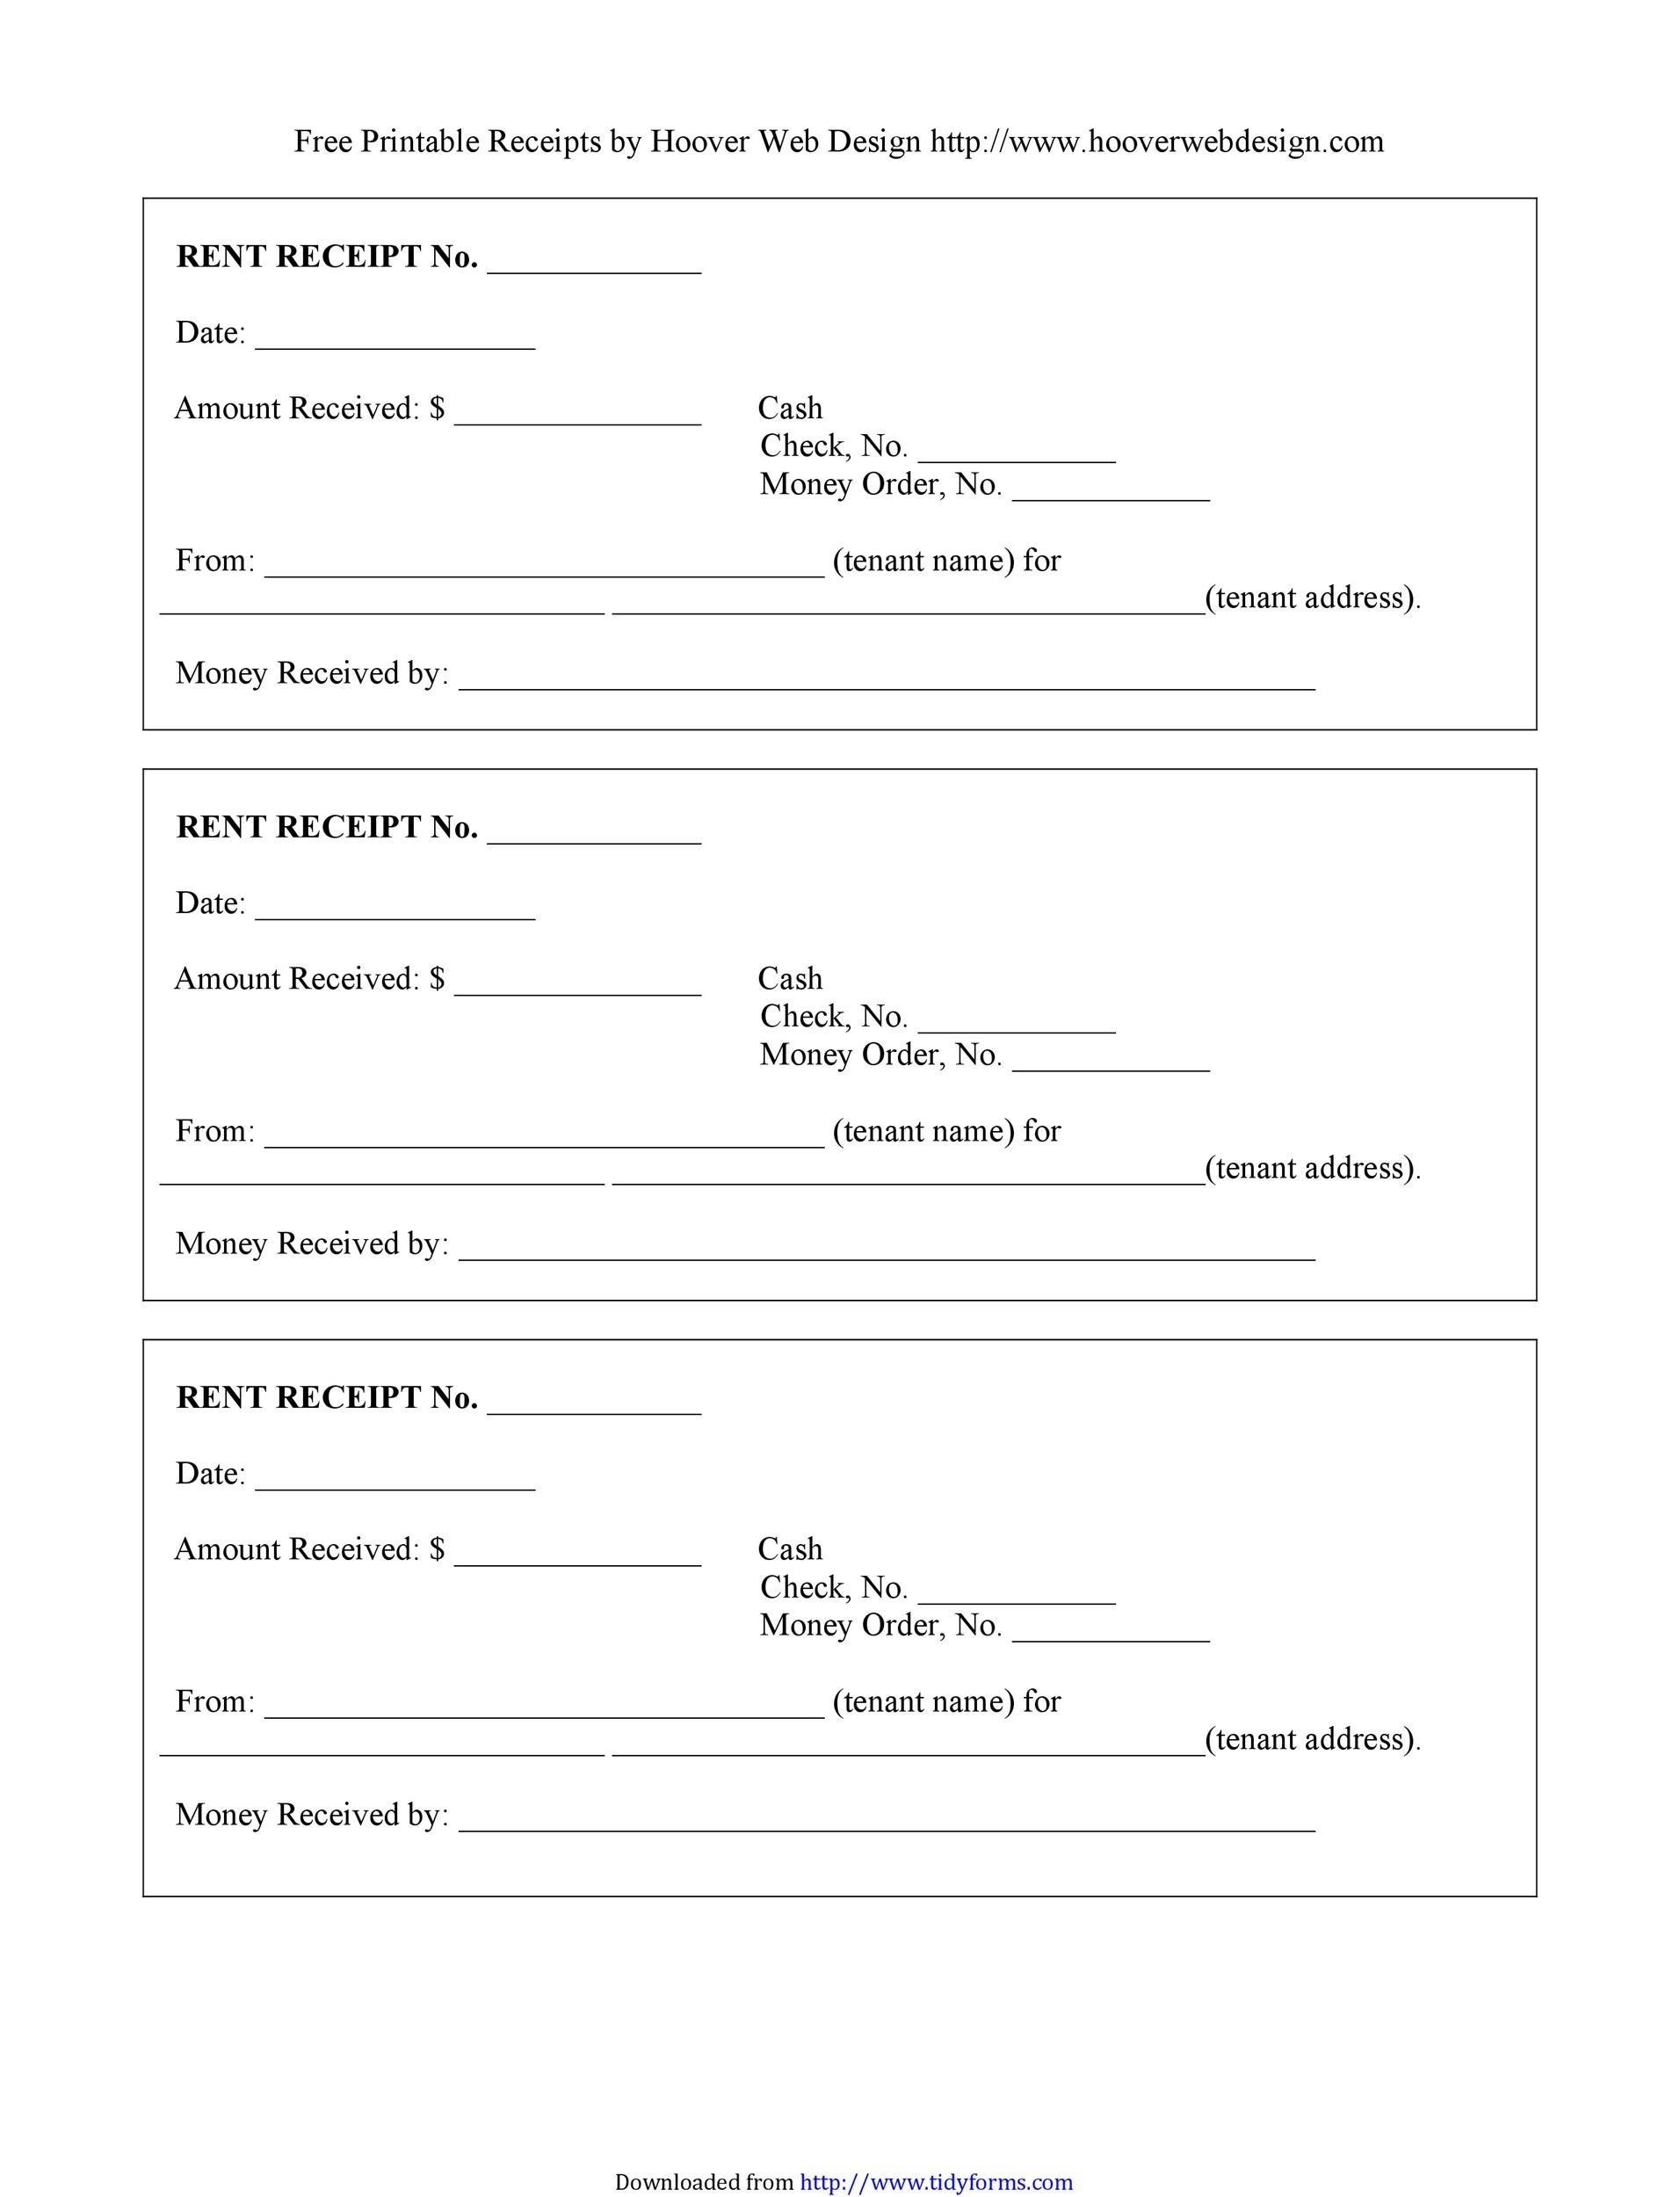 rent-receipt-template-download-this-printable-rent-receipt-template